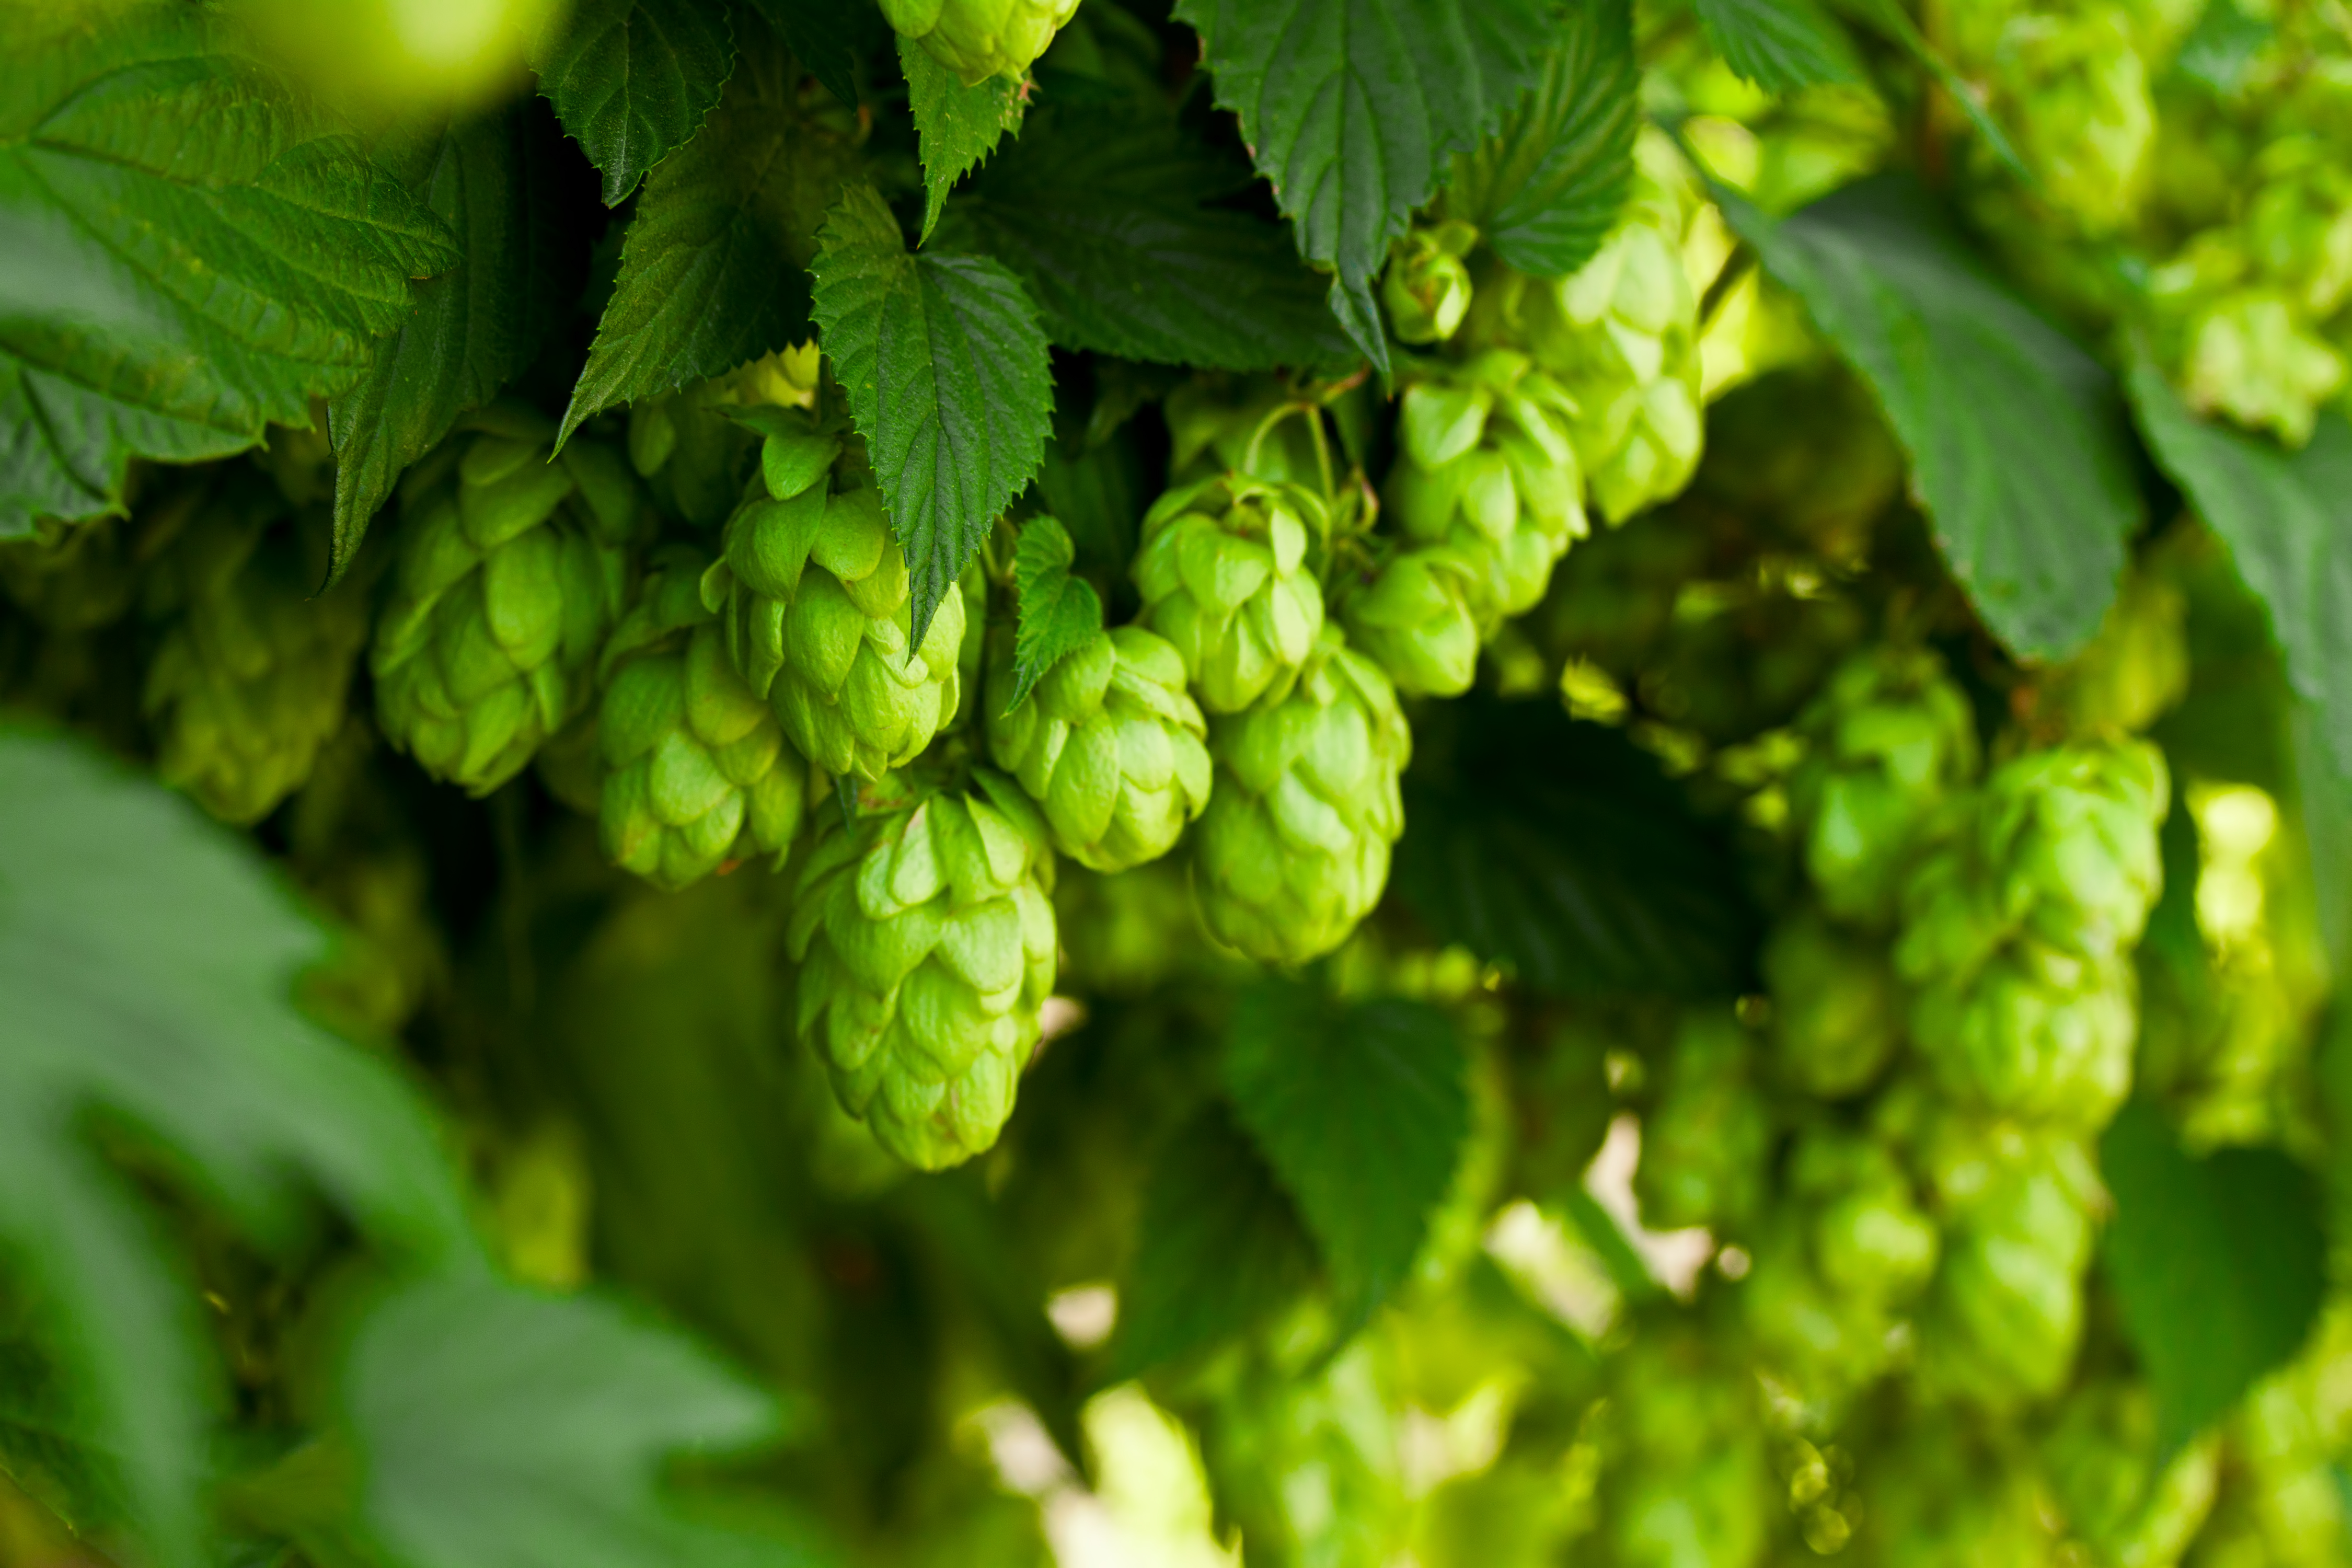 A bunch of green hops on a tree